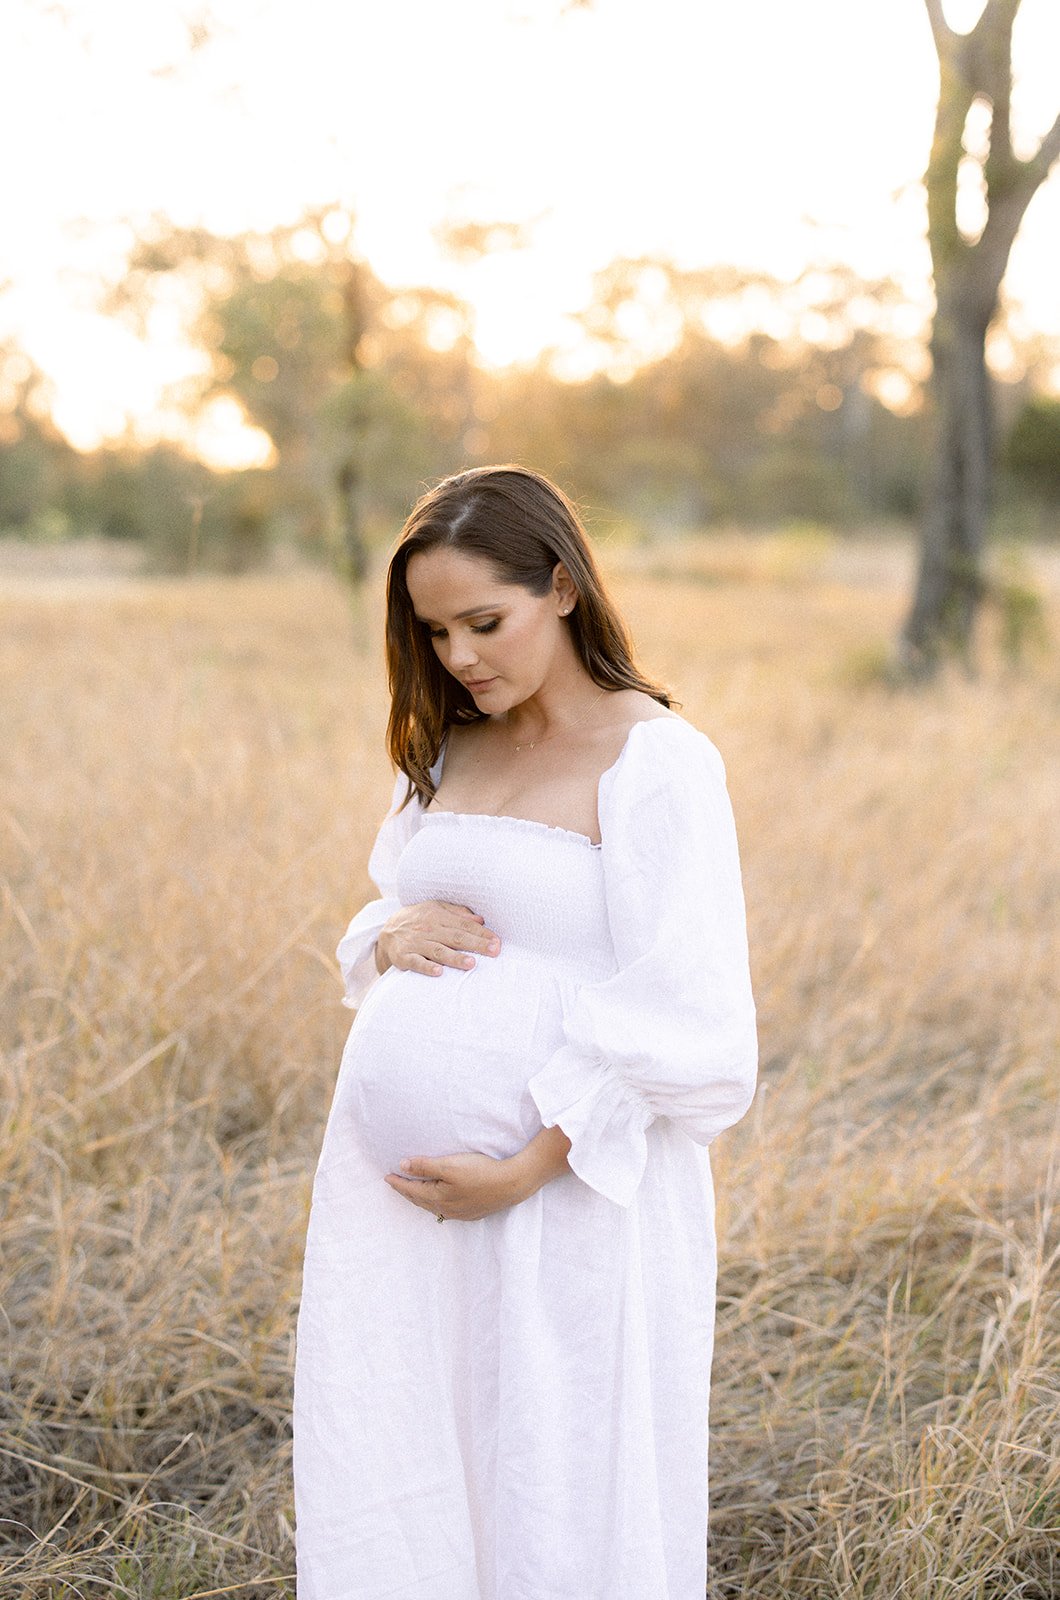 Expectant mother wearing a white dress holds her baby belly in an open field